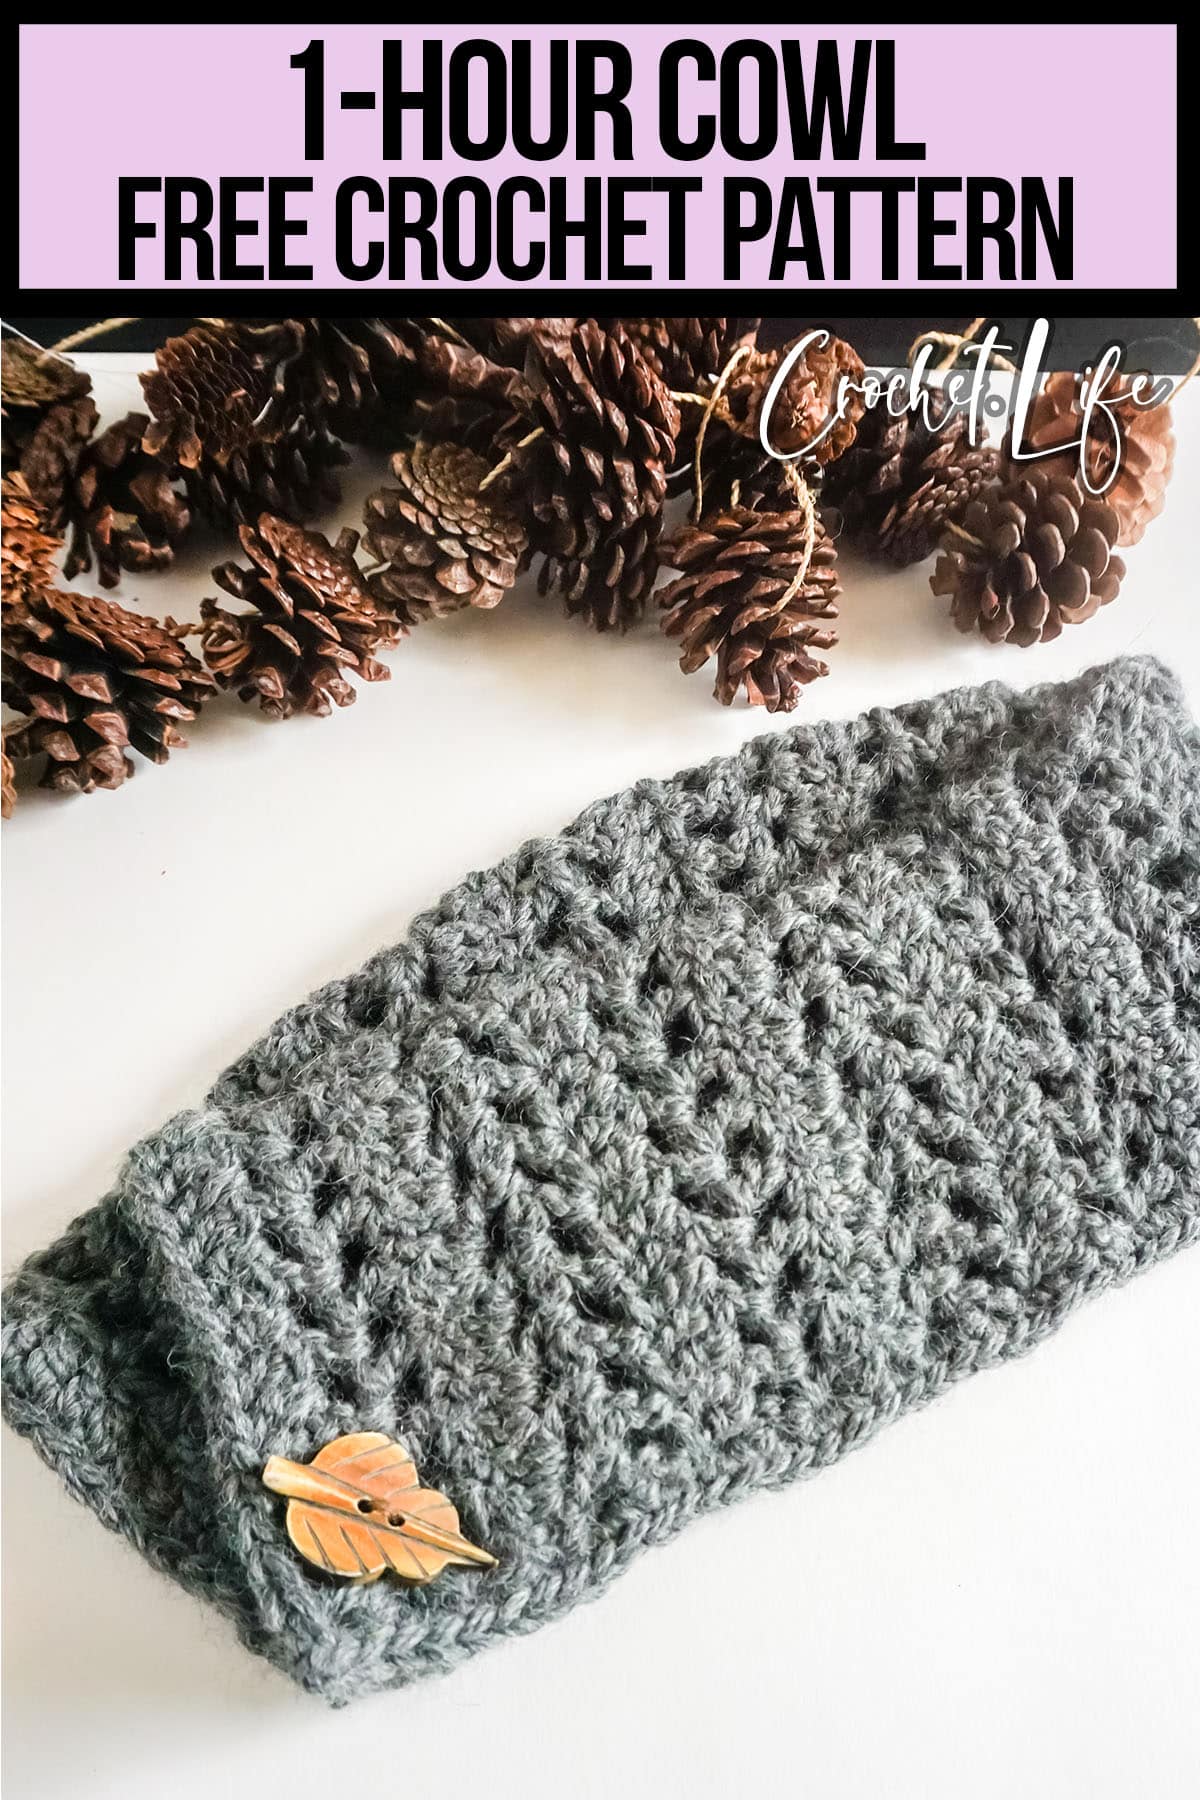 fast cowl crochet pattern with text which reads one hour cowl free crochet pattern